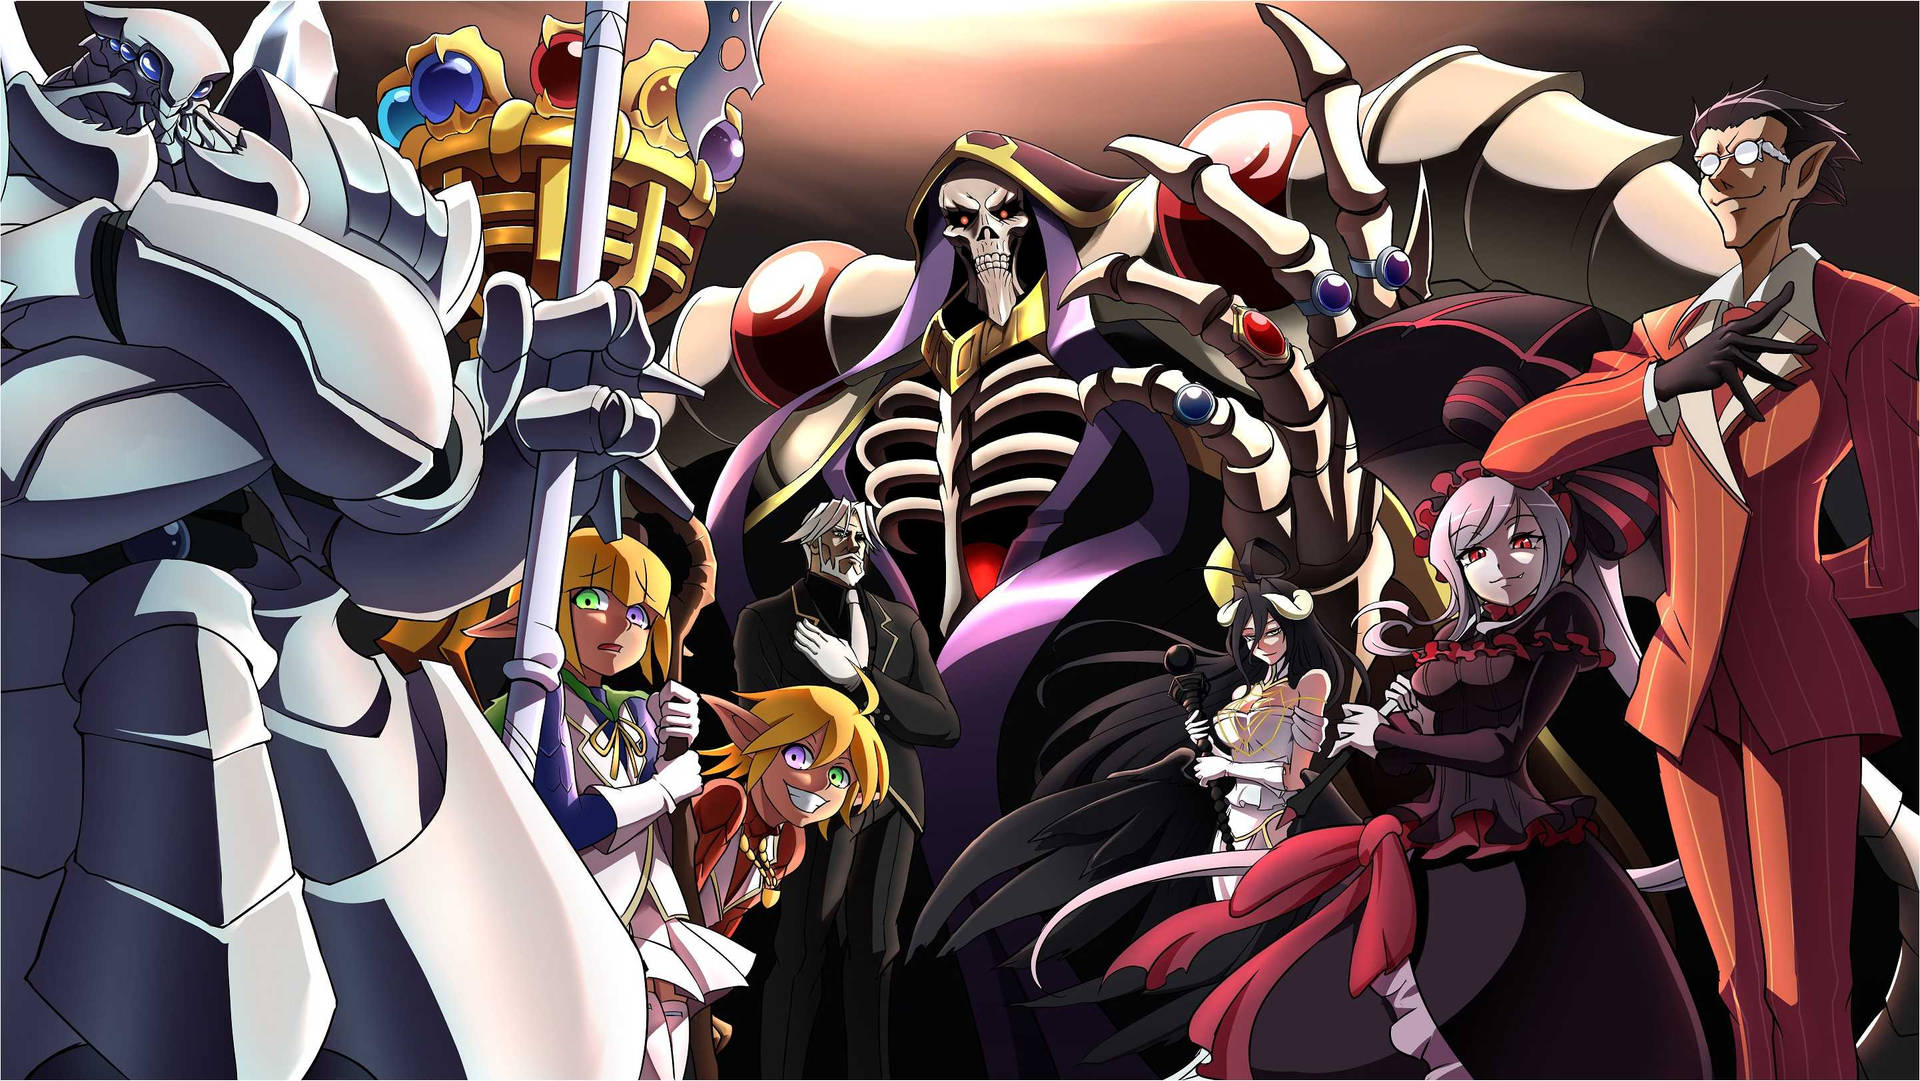 Download Overlord Wallpaper